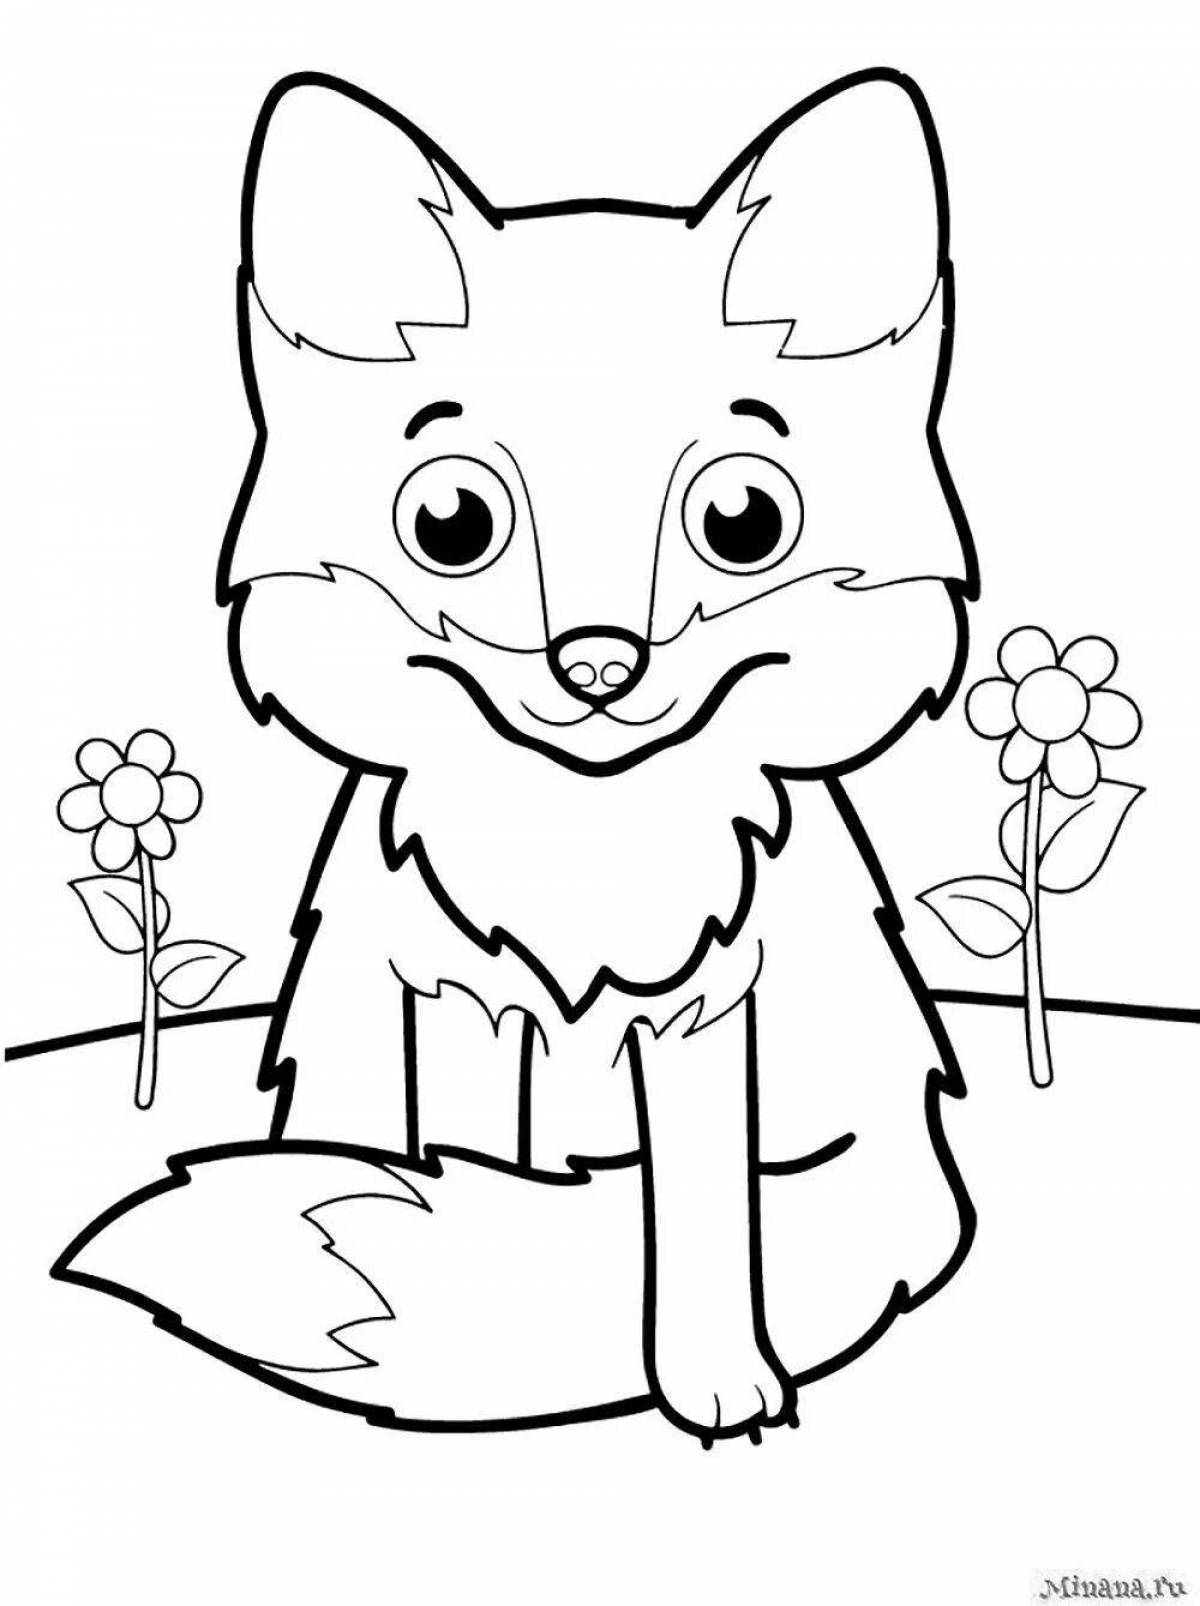 Funny fox coloring book for kids 6-7 years old